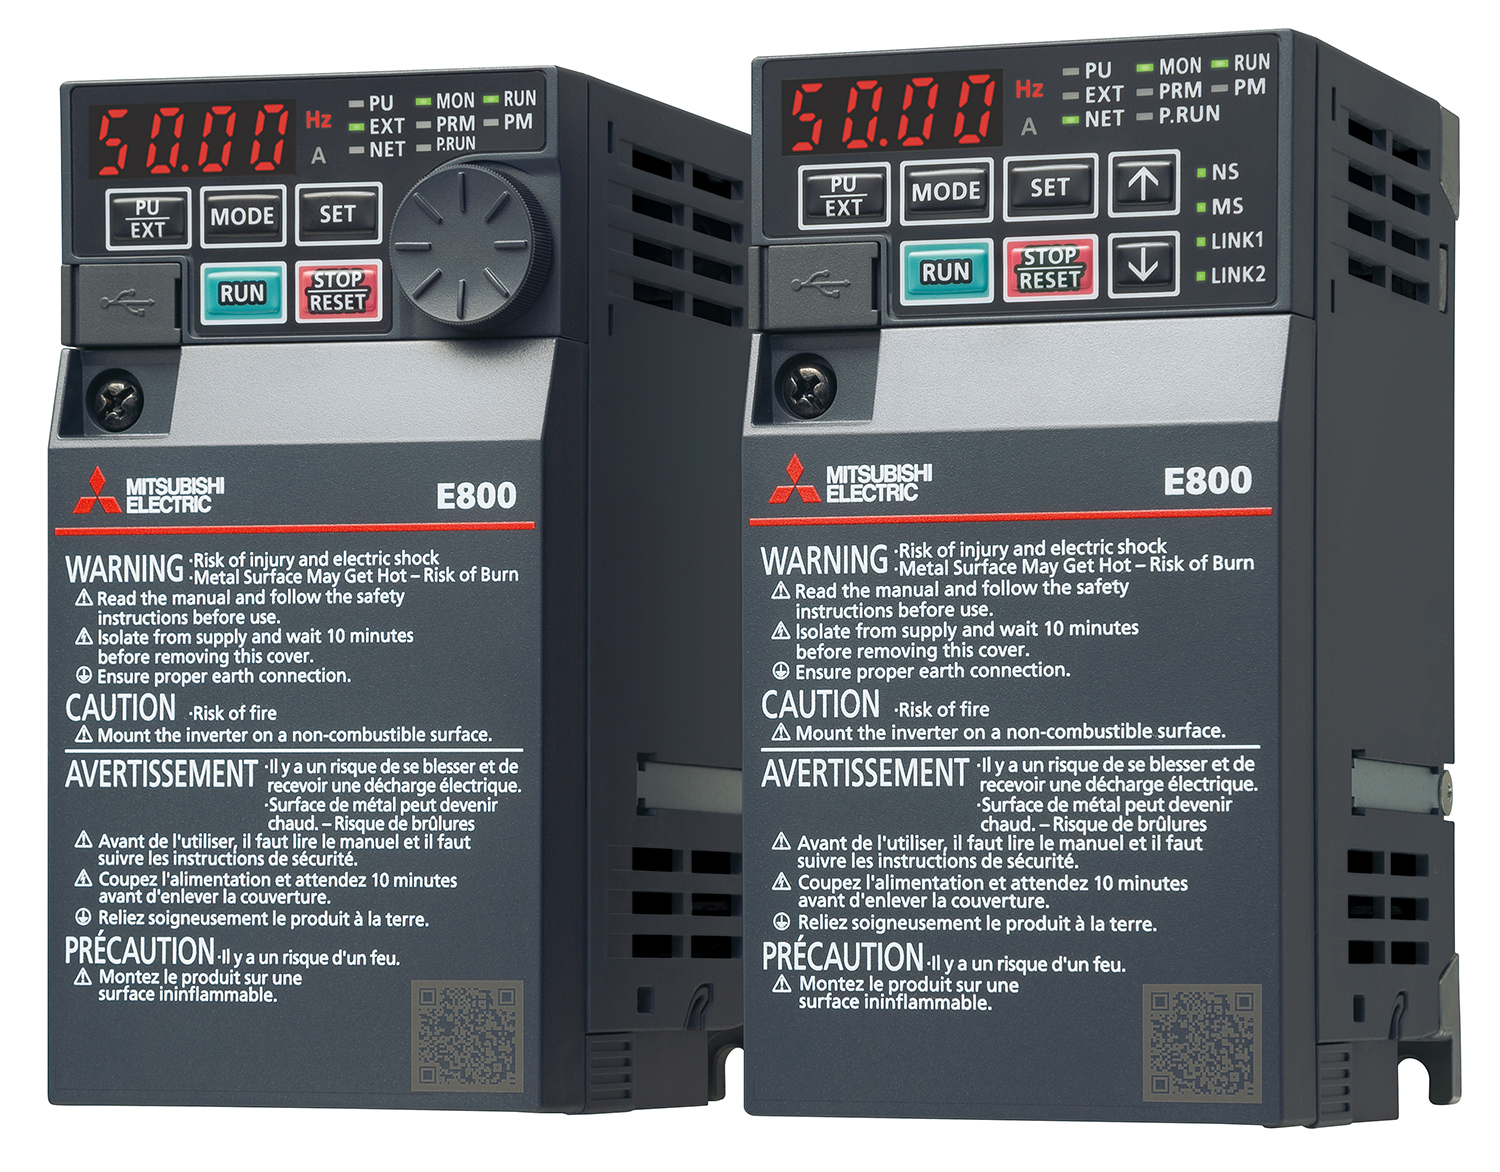 The latest Mitsubishi Electric FR-E800 inverter series offers highly flexible, compact inverters with multiple, built-in communications, including TSN, suited for a wide range of applications including Automotive, Food & Beverage and Water and Wastewater.